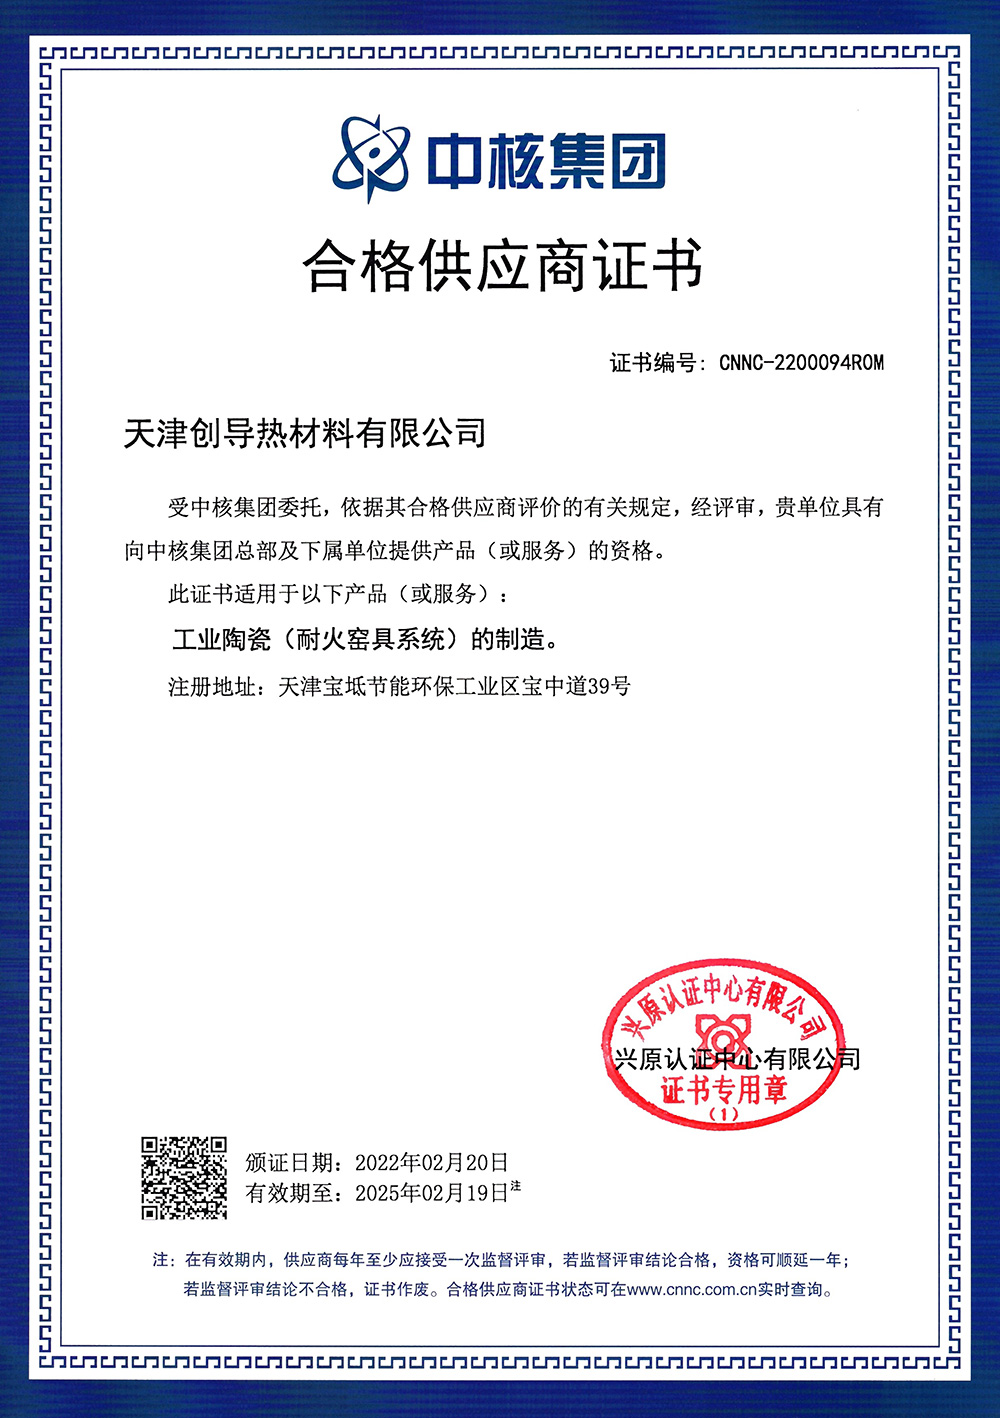 Tianjin Trend won the certificate of qualified supplier from China National Nuclear Corporation